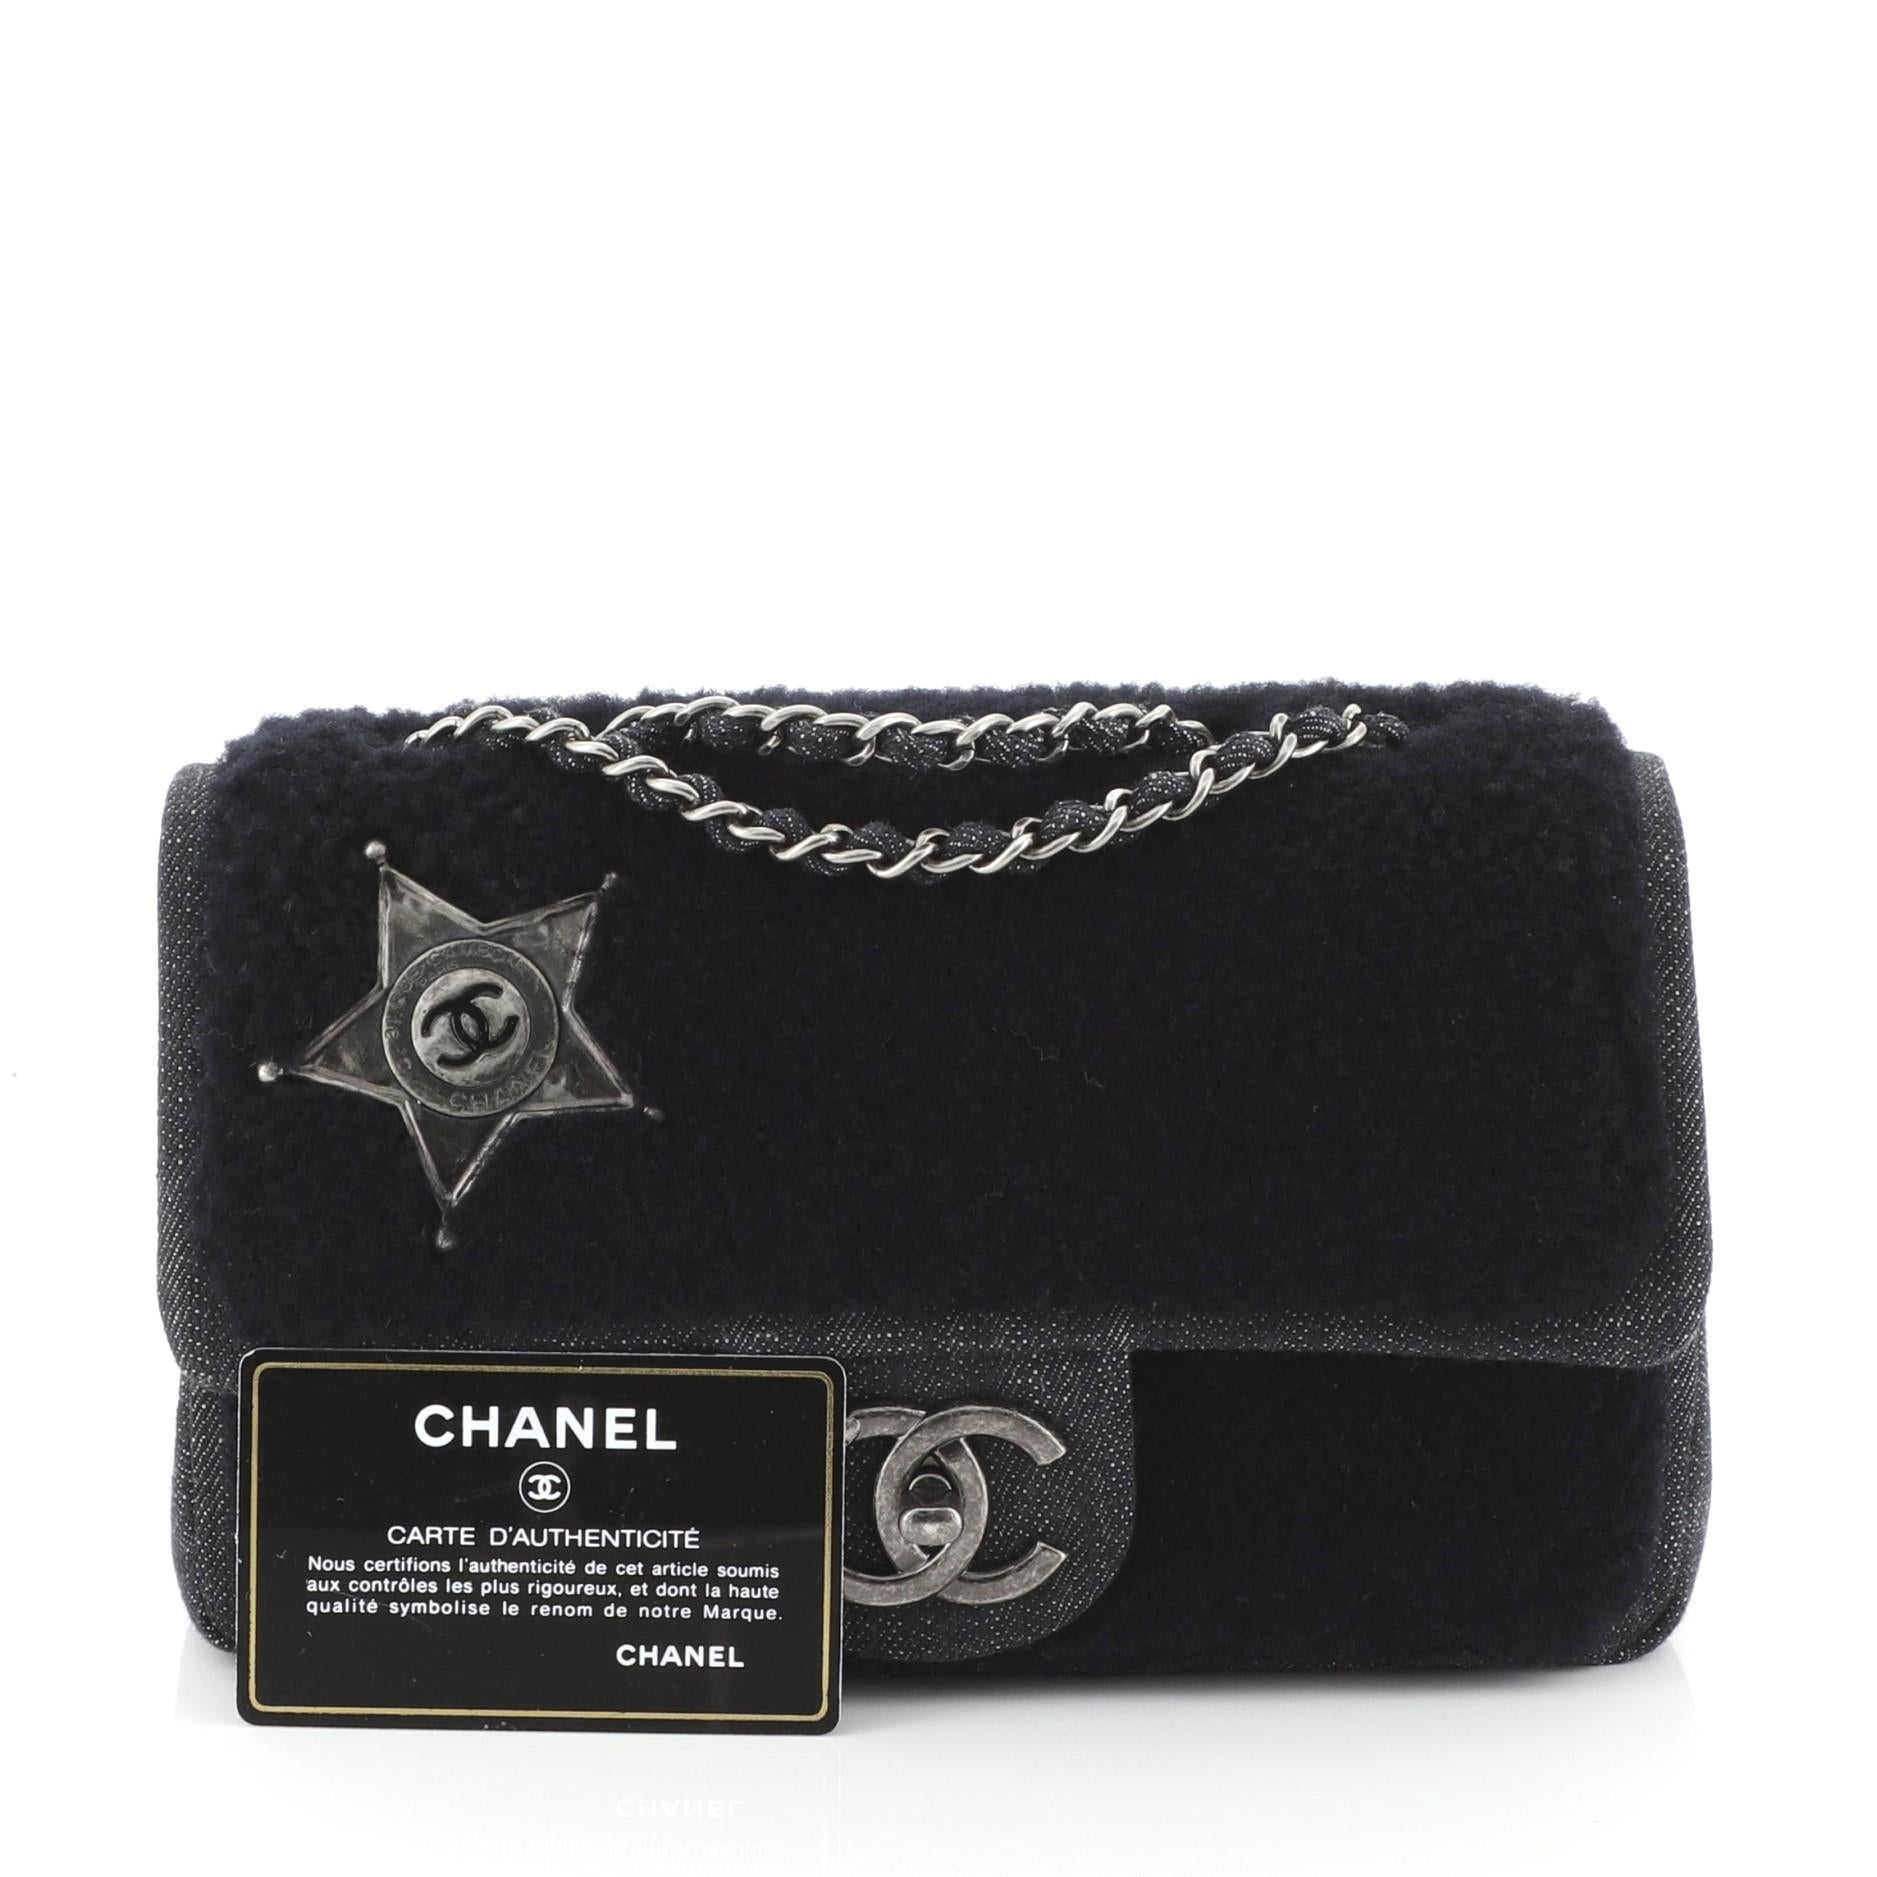 This Chanel Paris-Dallas Flap Bag Denim and Shearling Small, crafted from blue denim and shearling, features woven-in denim chain strap, interlocking CC logo at front, and aged silver-tone hardware. Its CC turn-lock closure opens to a red leather